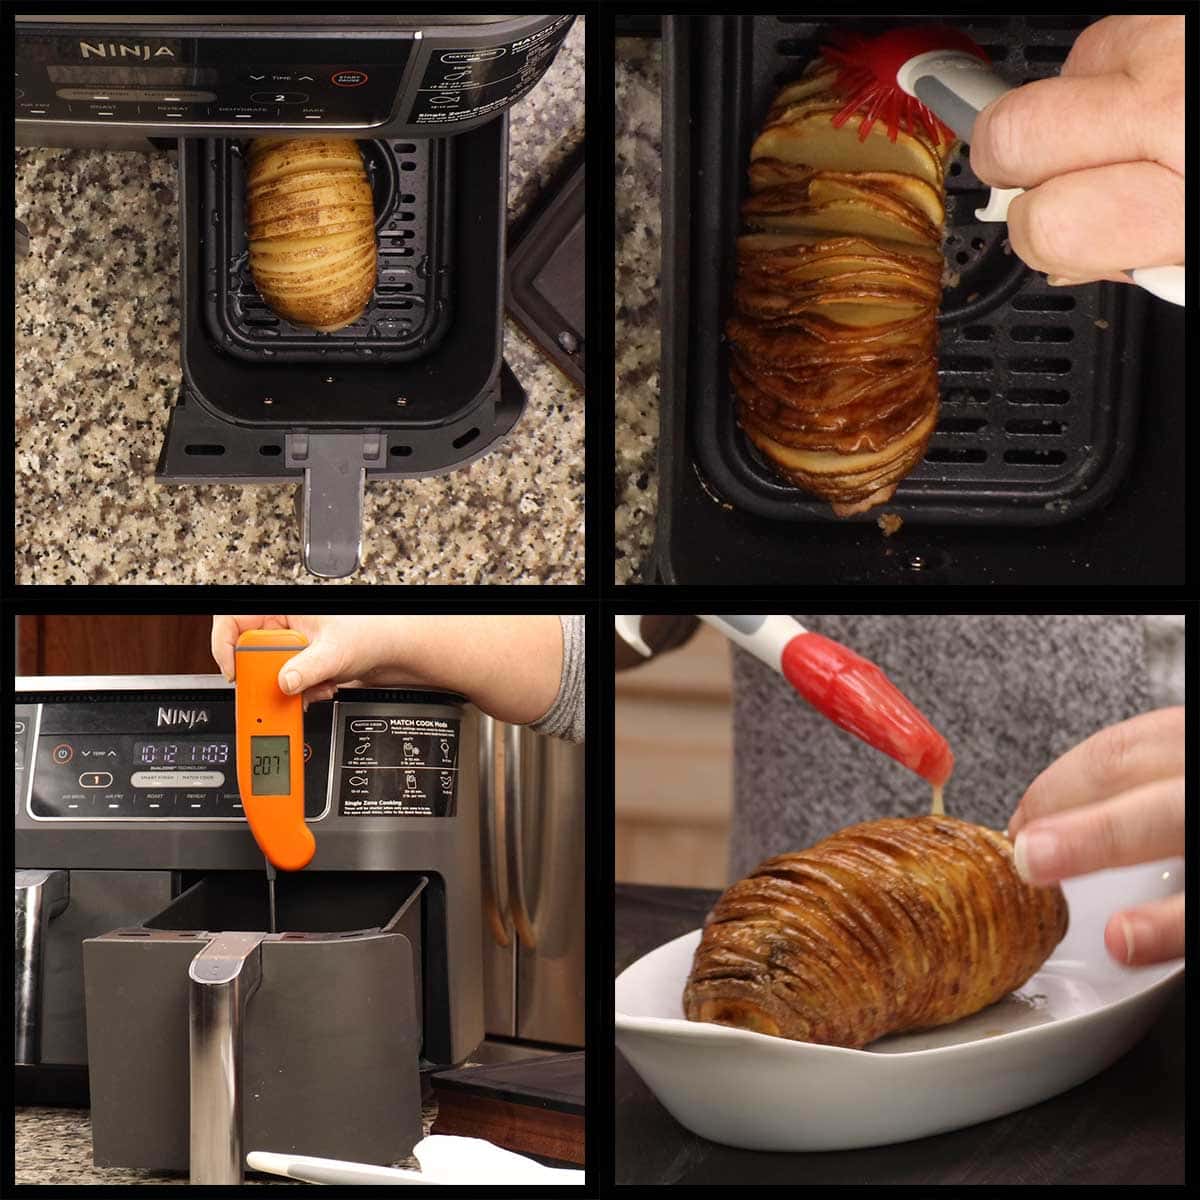 collage showing potato into air fryer basket, butter being brushed on, temping potato and adding butter after air frying.